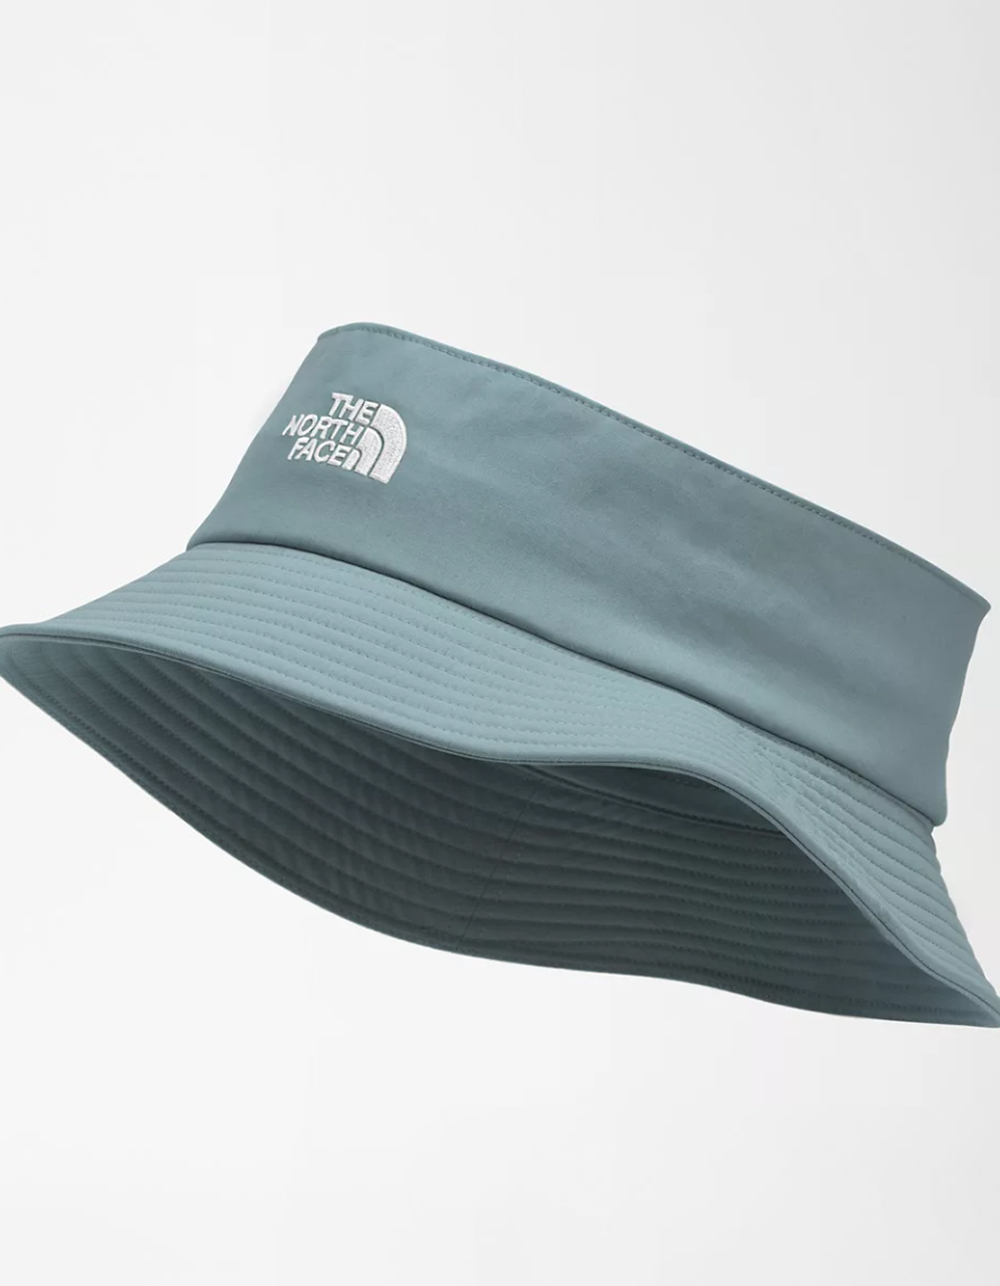 THE NORTH FACE Class V Top Knot Bucket Hat